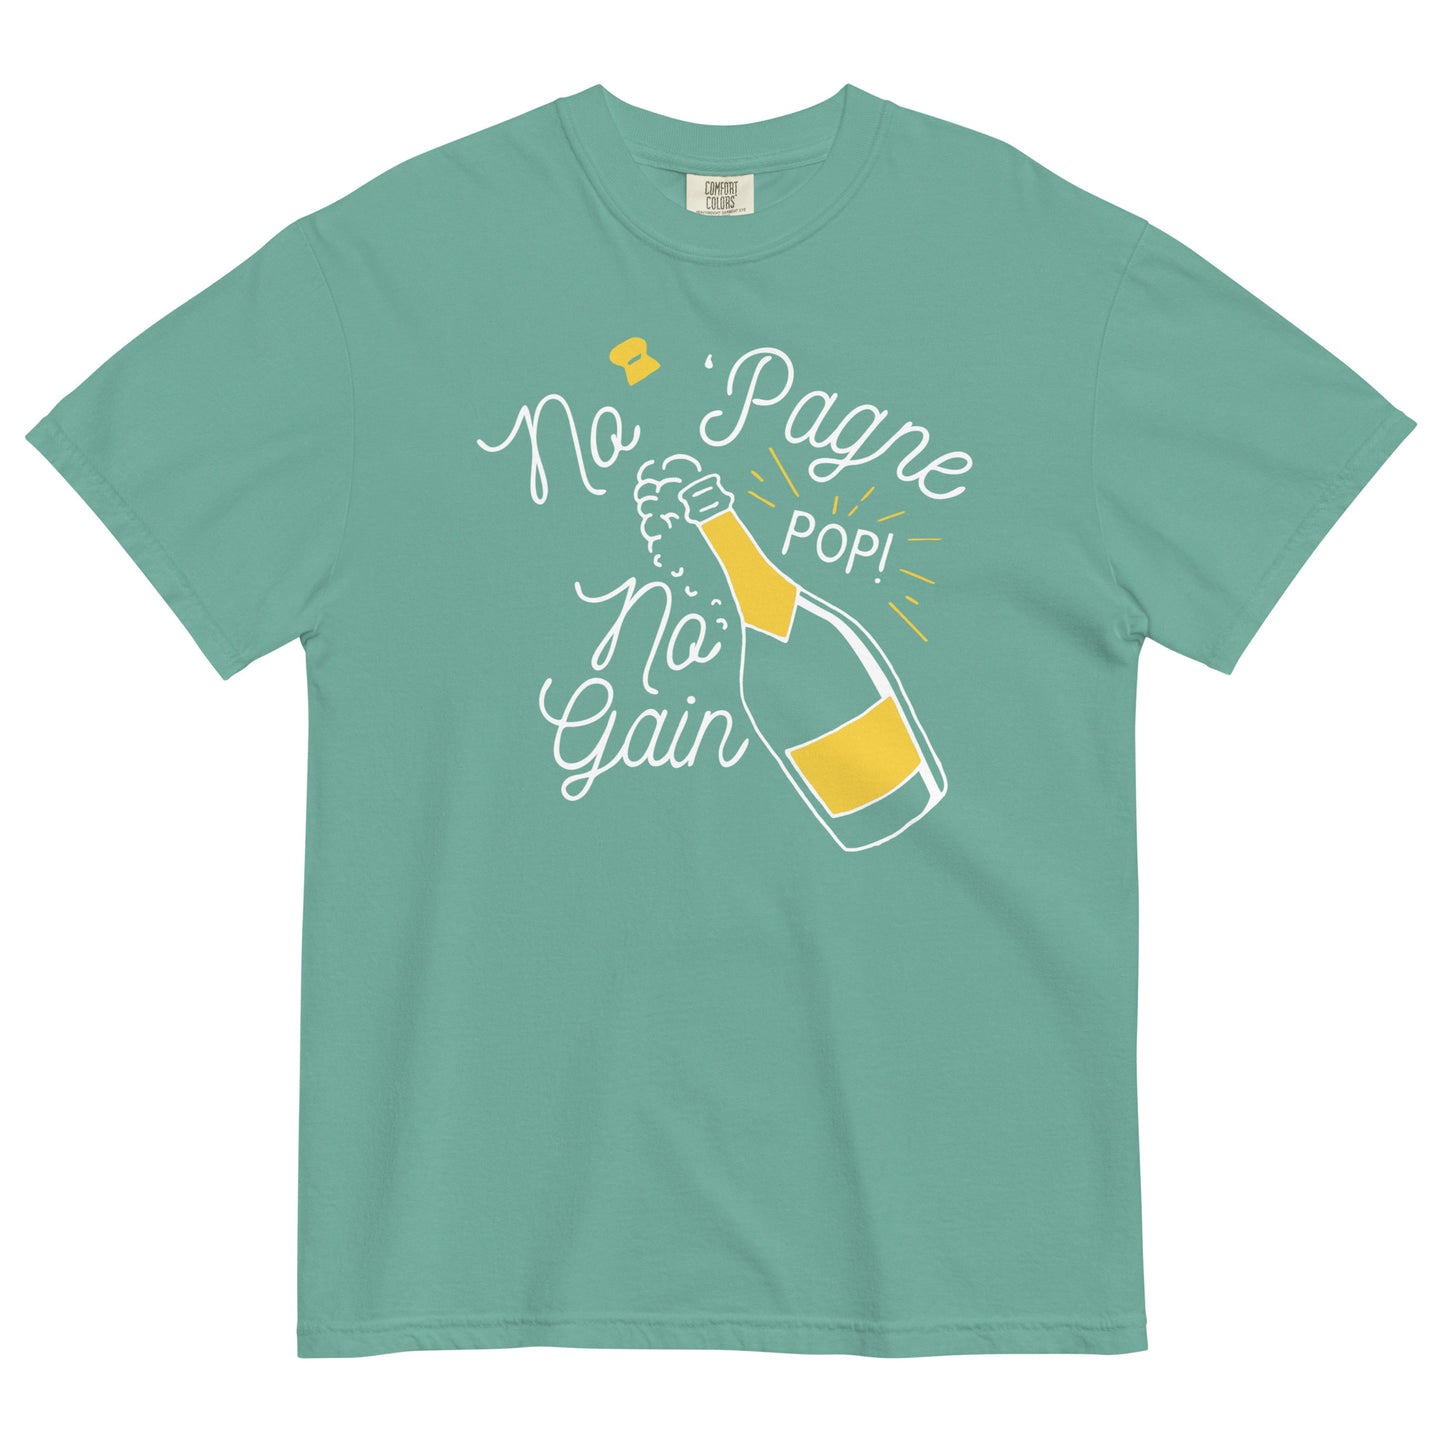 No 'Pagne No Gain Men's Relaxed Fit Tee